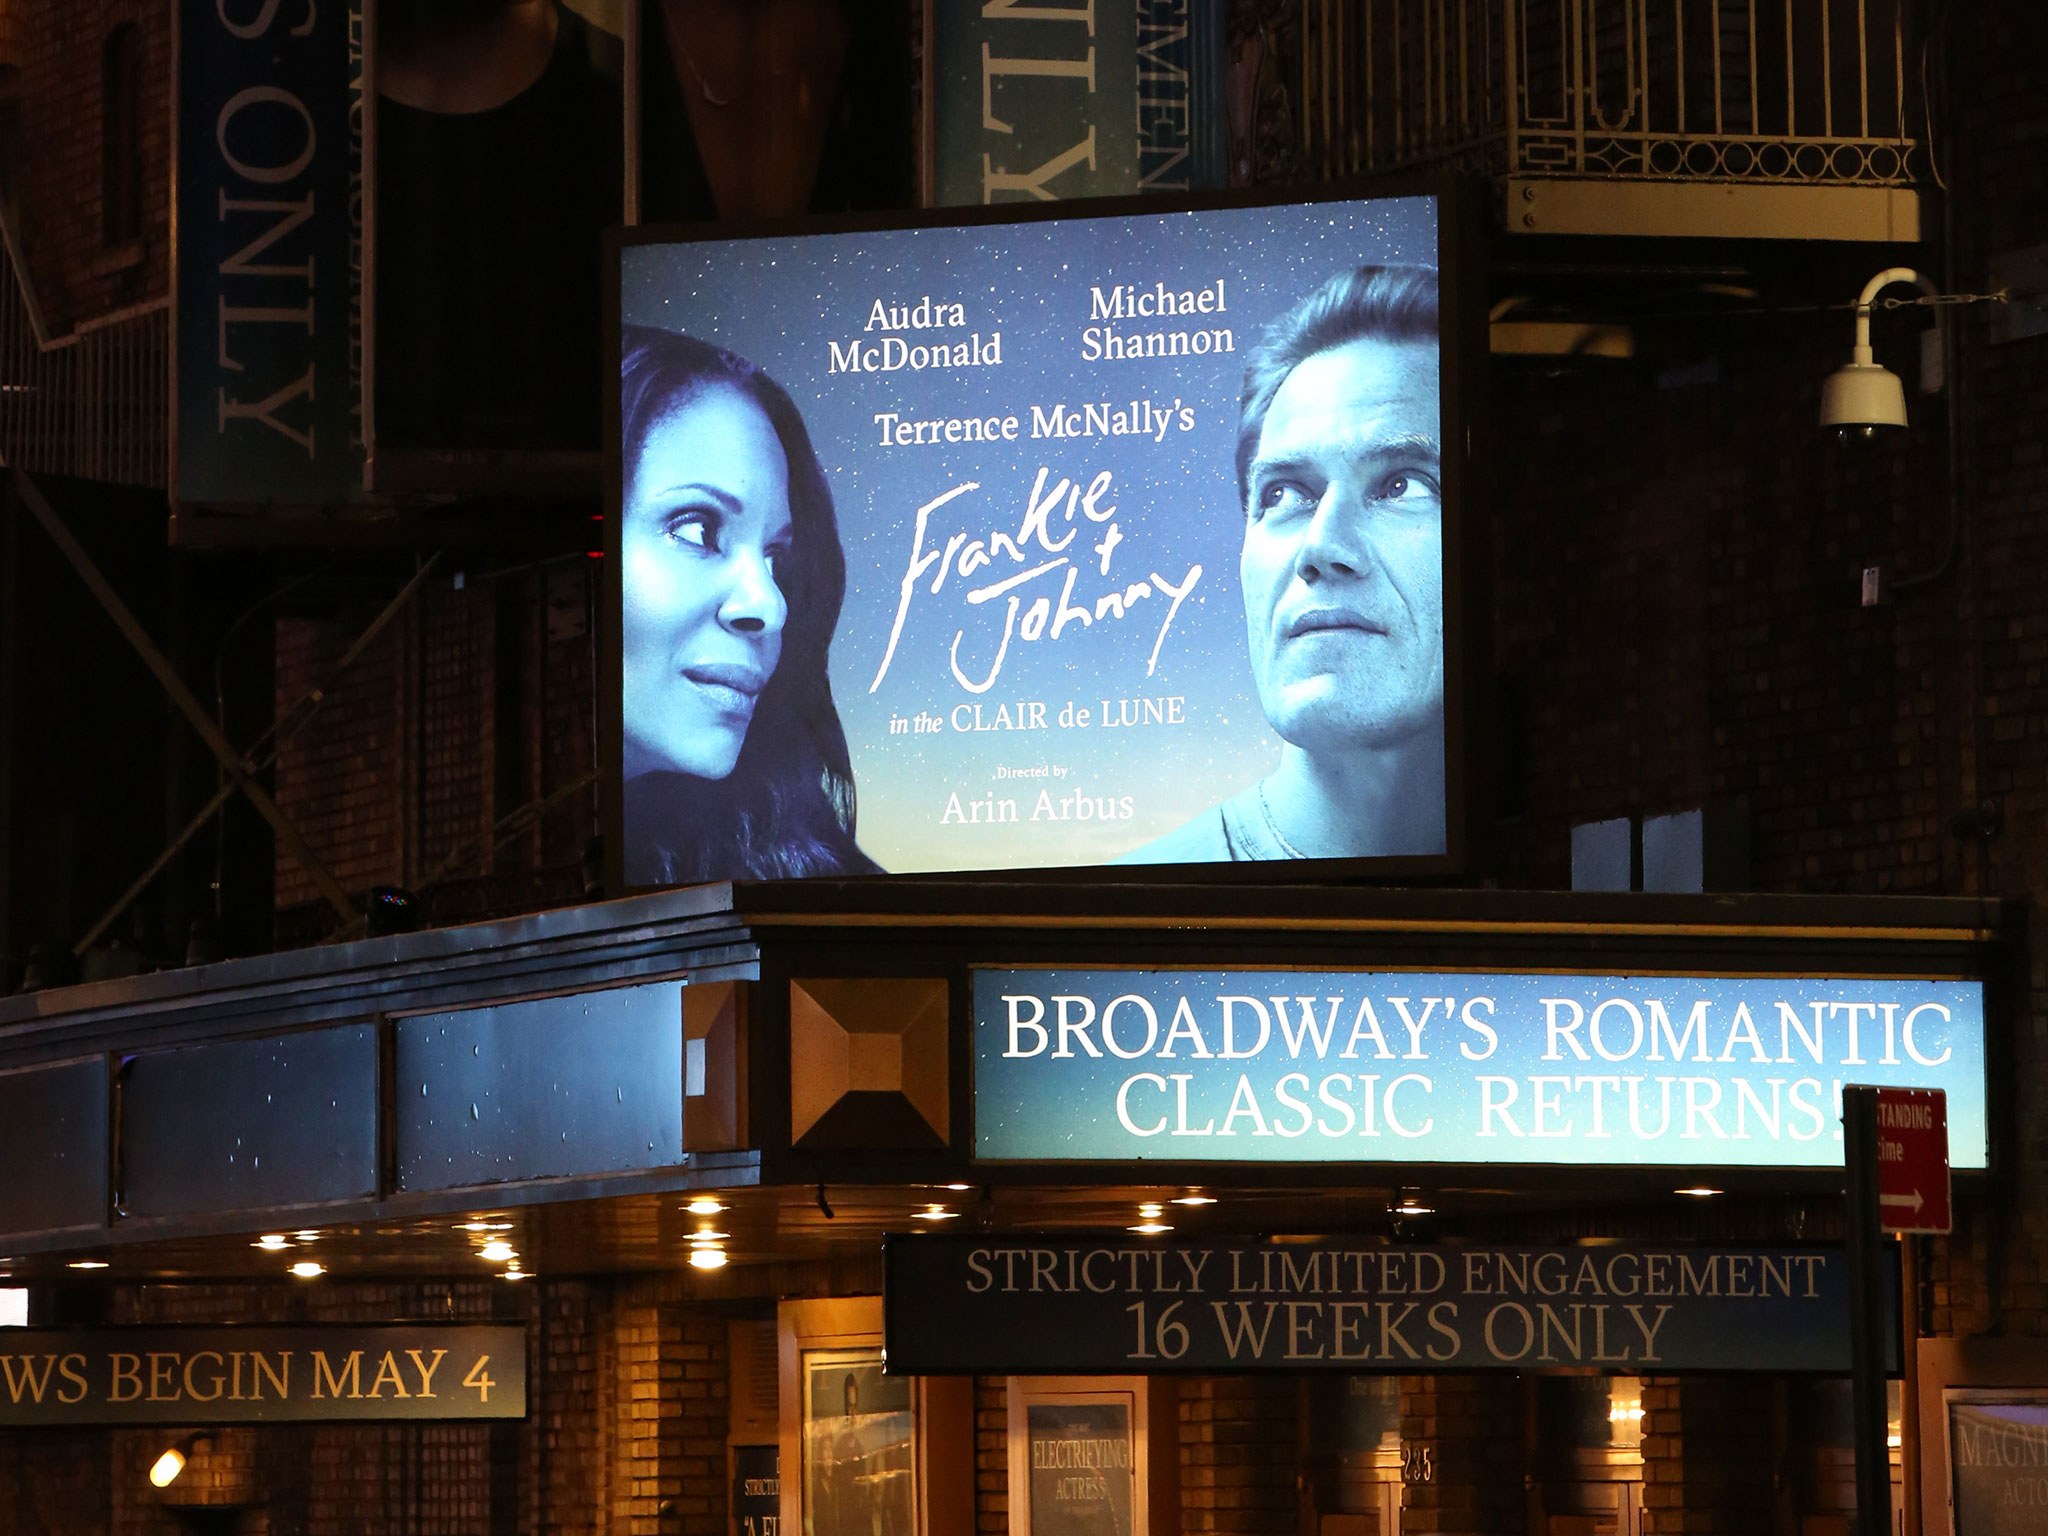 Frankie and Johnny Marquee at the Broadhurst Theatre